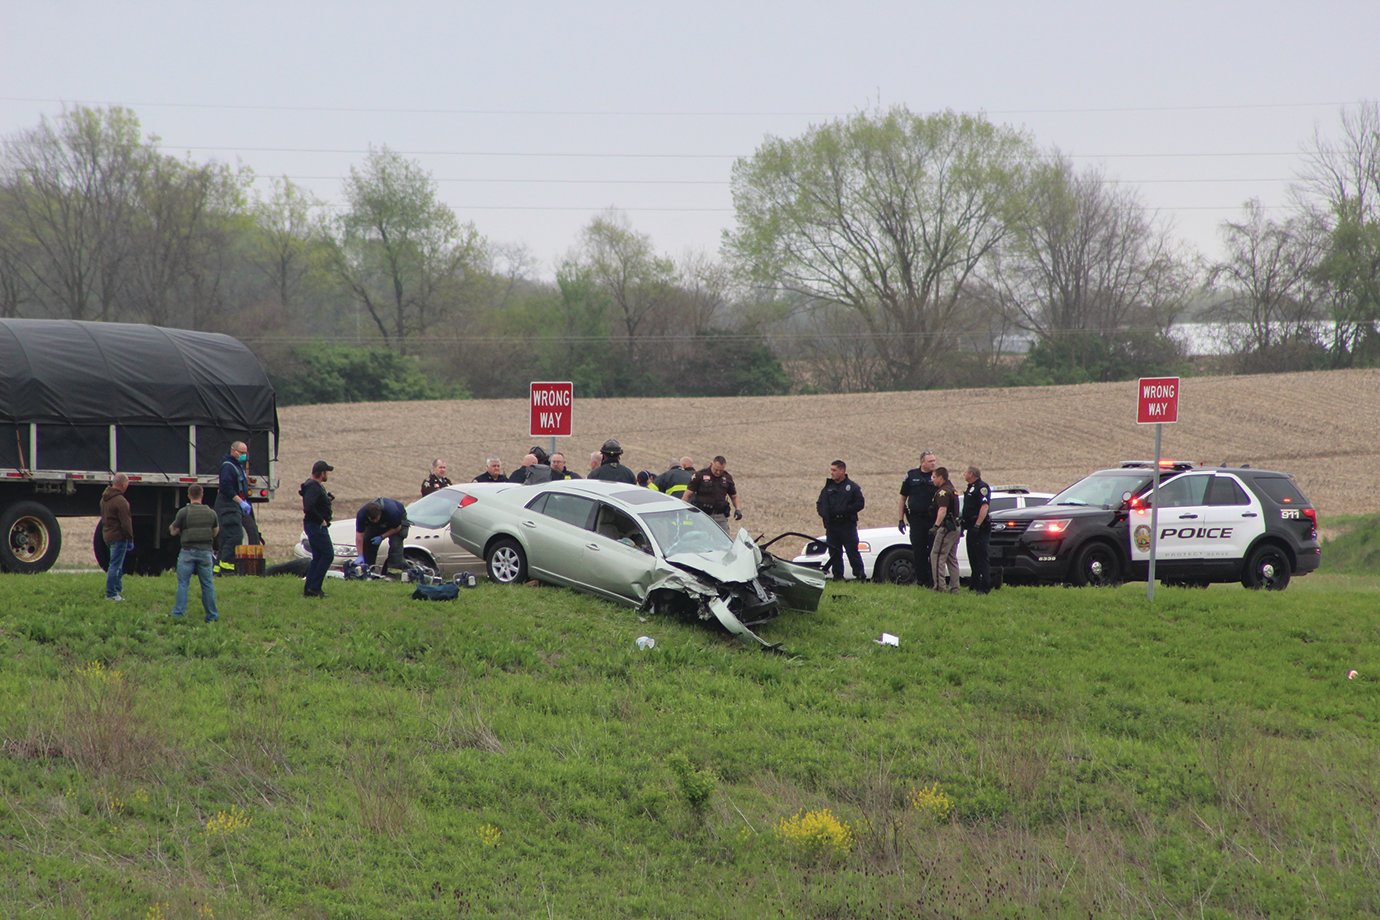 A high-speed pursuit that began in Hamilton County ended Tuesday afternoon when the suspect in question collided with a vehicle and semi-trailer on the Interstate 74 exit ramp at State Road 32 in Montgomery County.